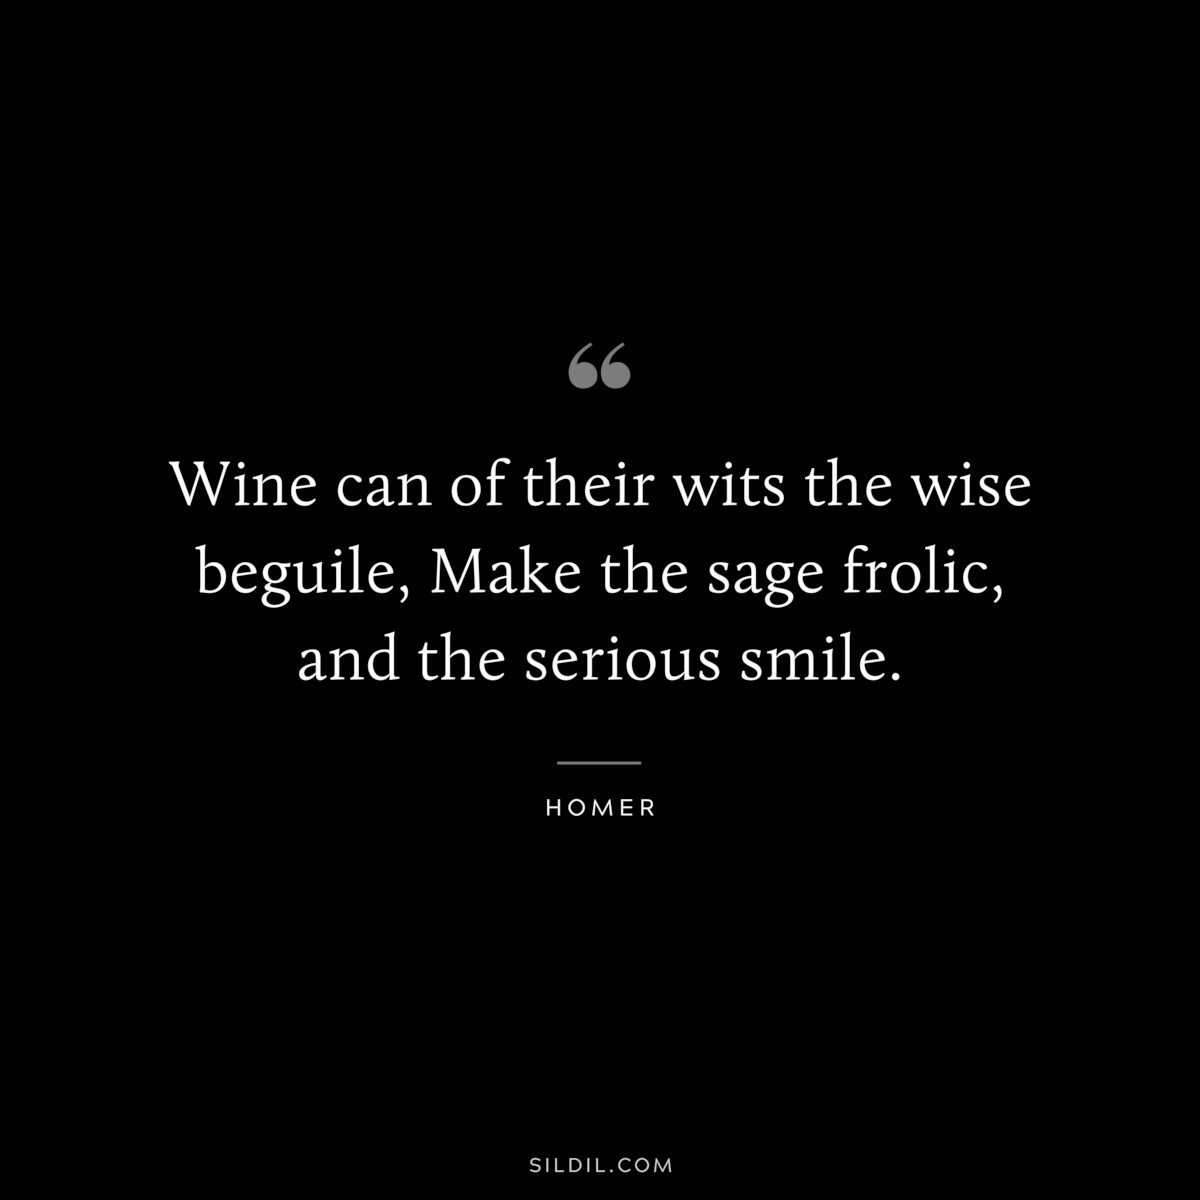 Wine can of their wits the wise beguile, Make the sage frolic, and the serious smile. ― Homer